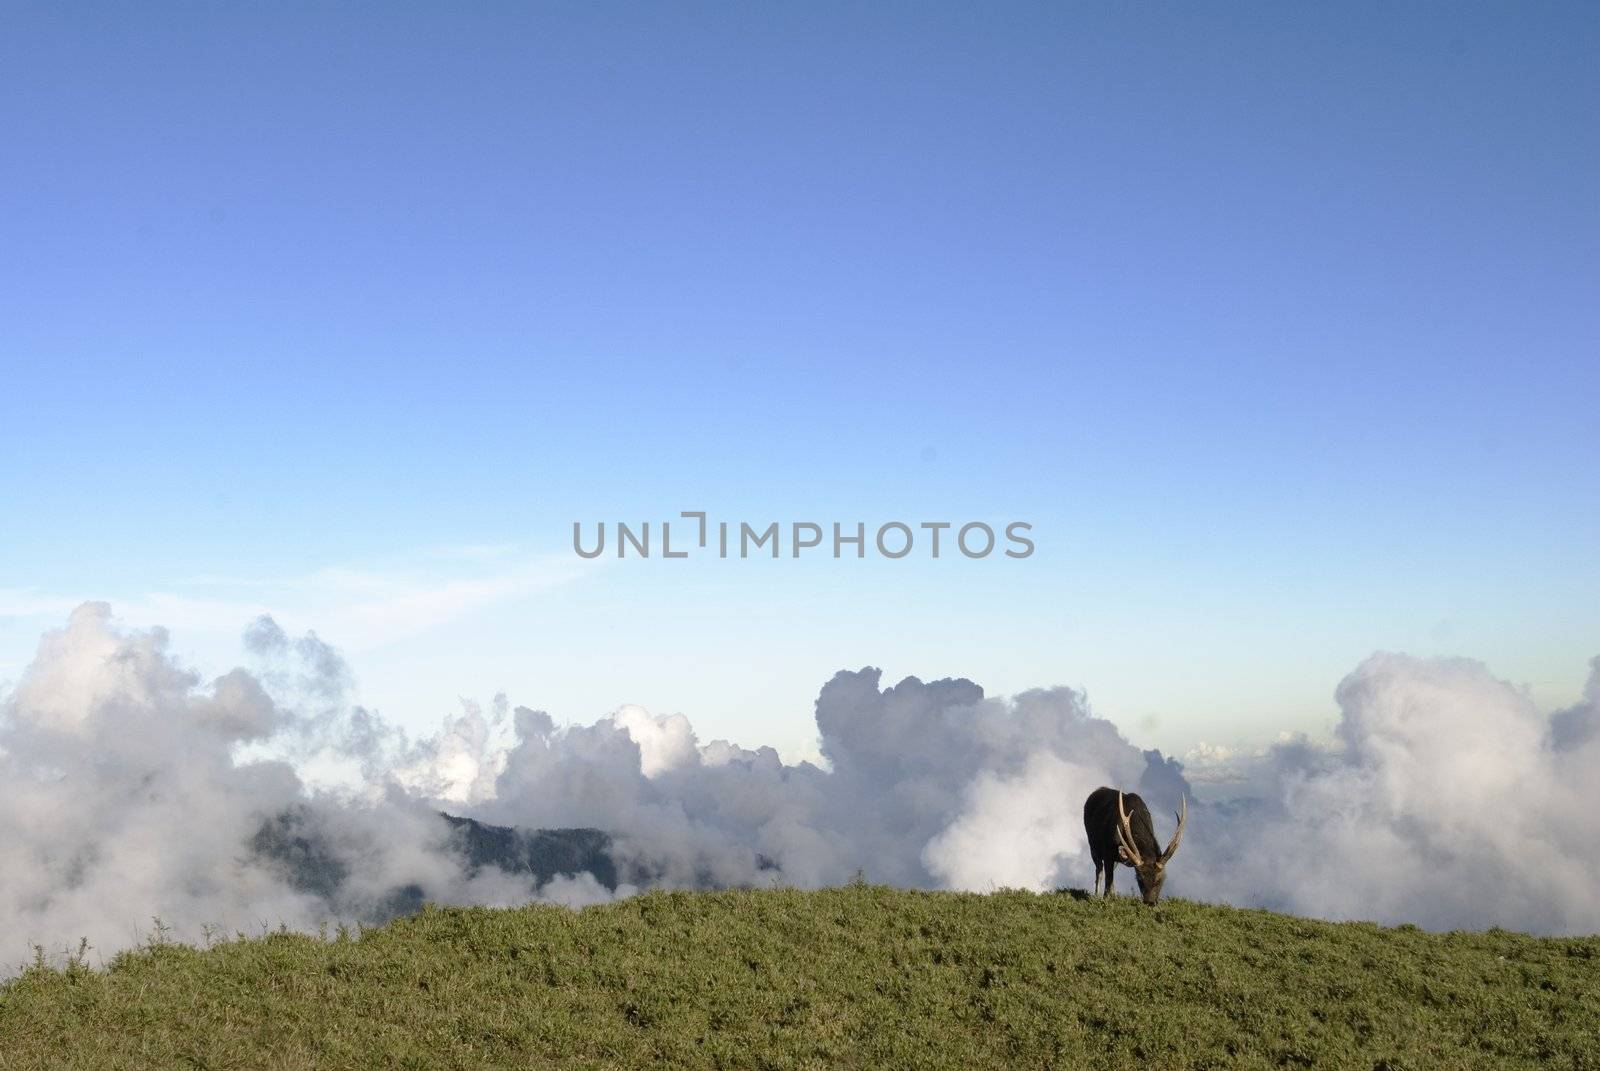 Beautiful lawn and clouds, which is a sambar grazing.
This photo is in Taiwan National Park by shooting.